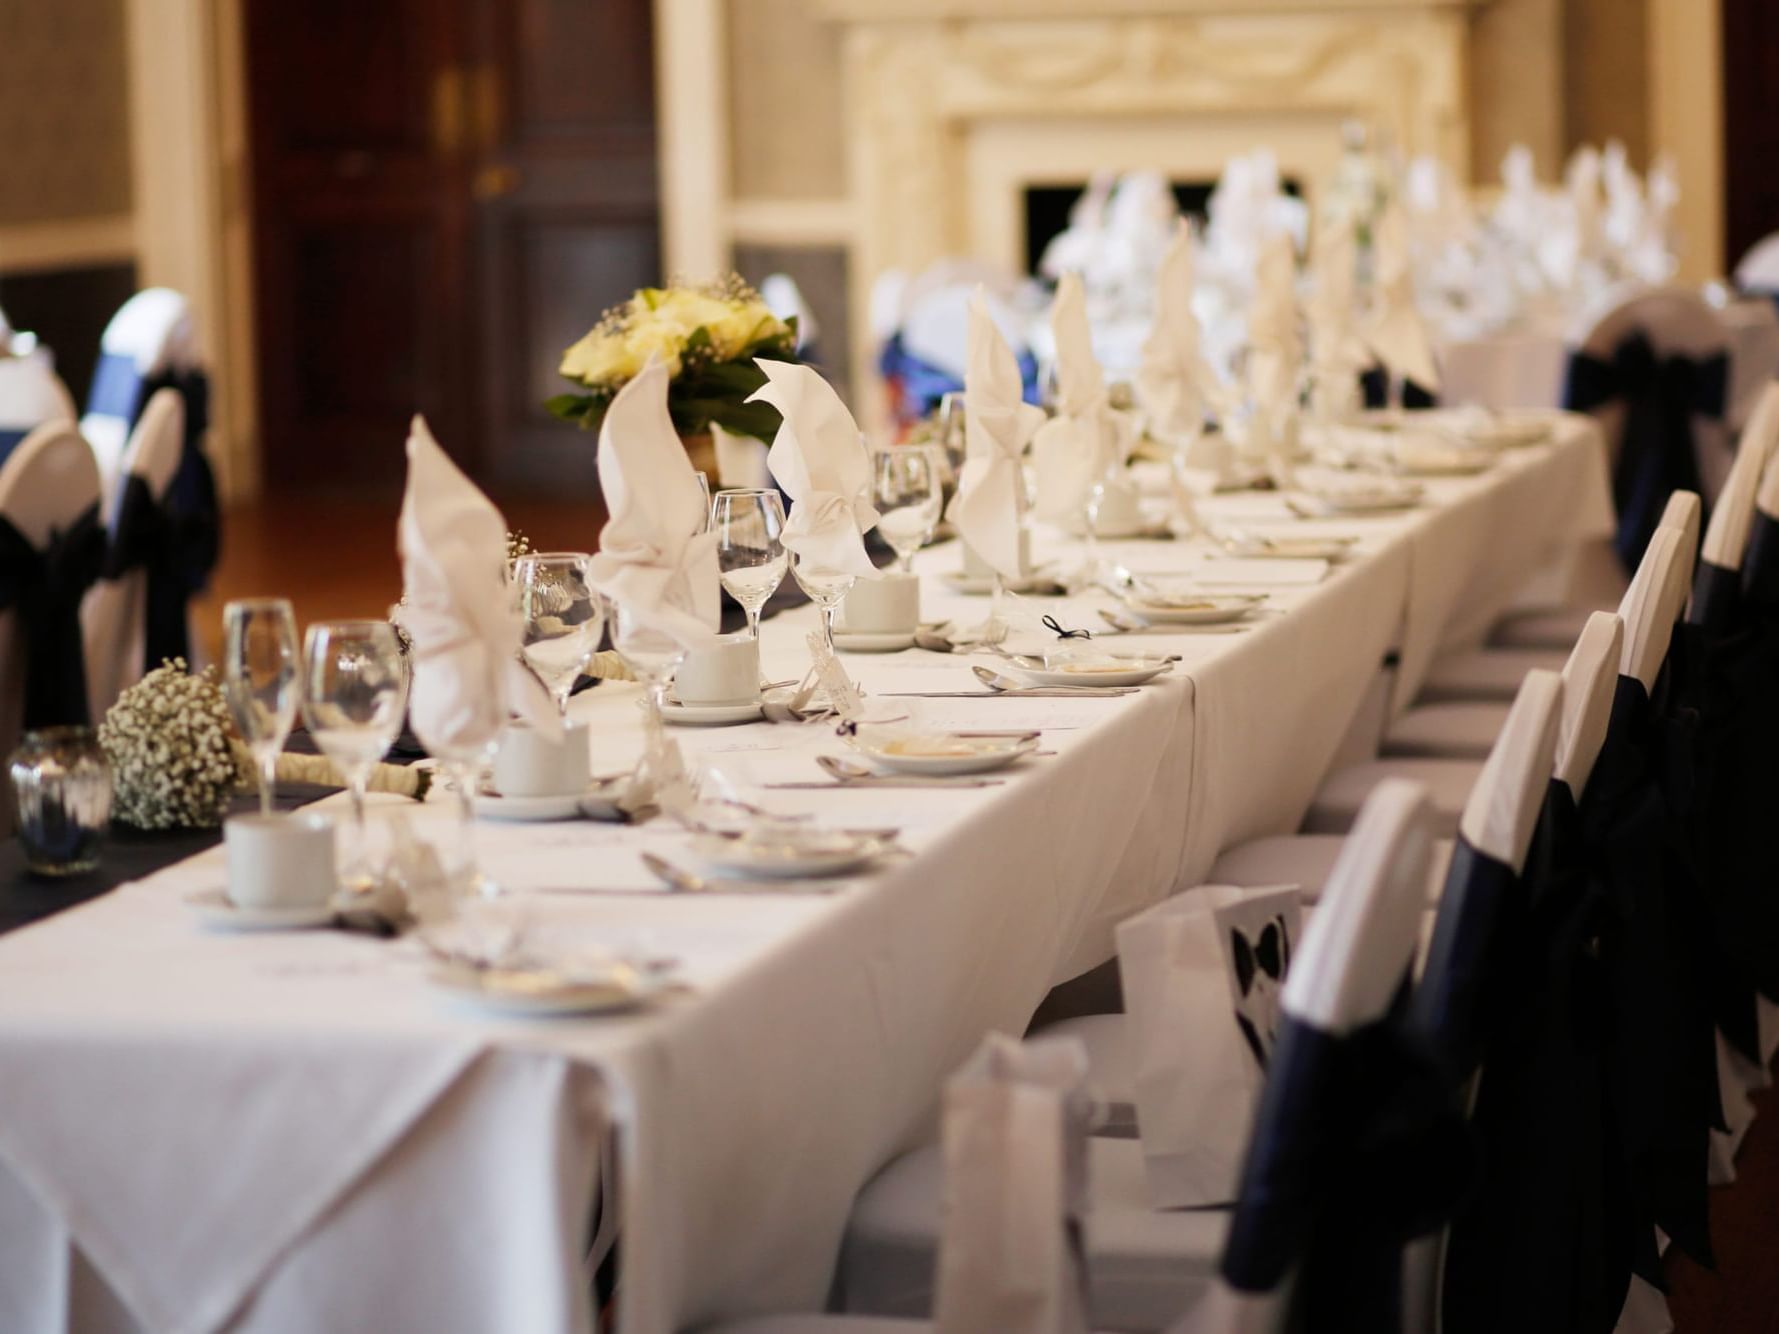 A banquet table arranged for a wedding at Easthampstead Park